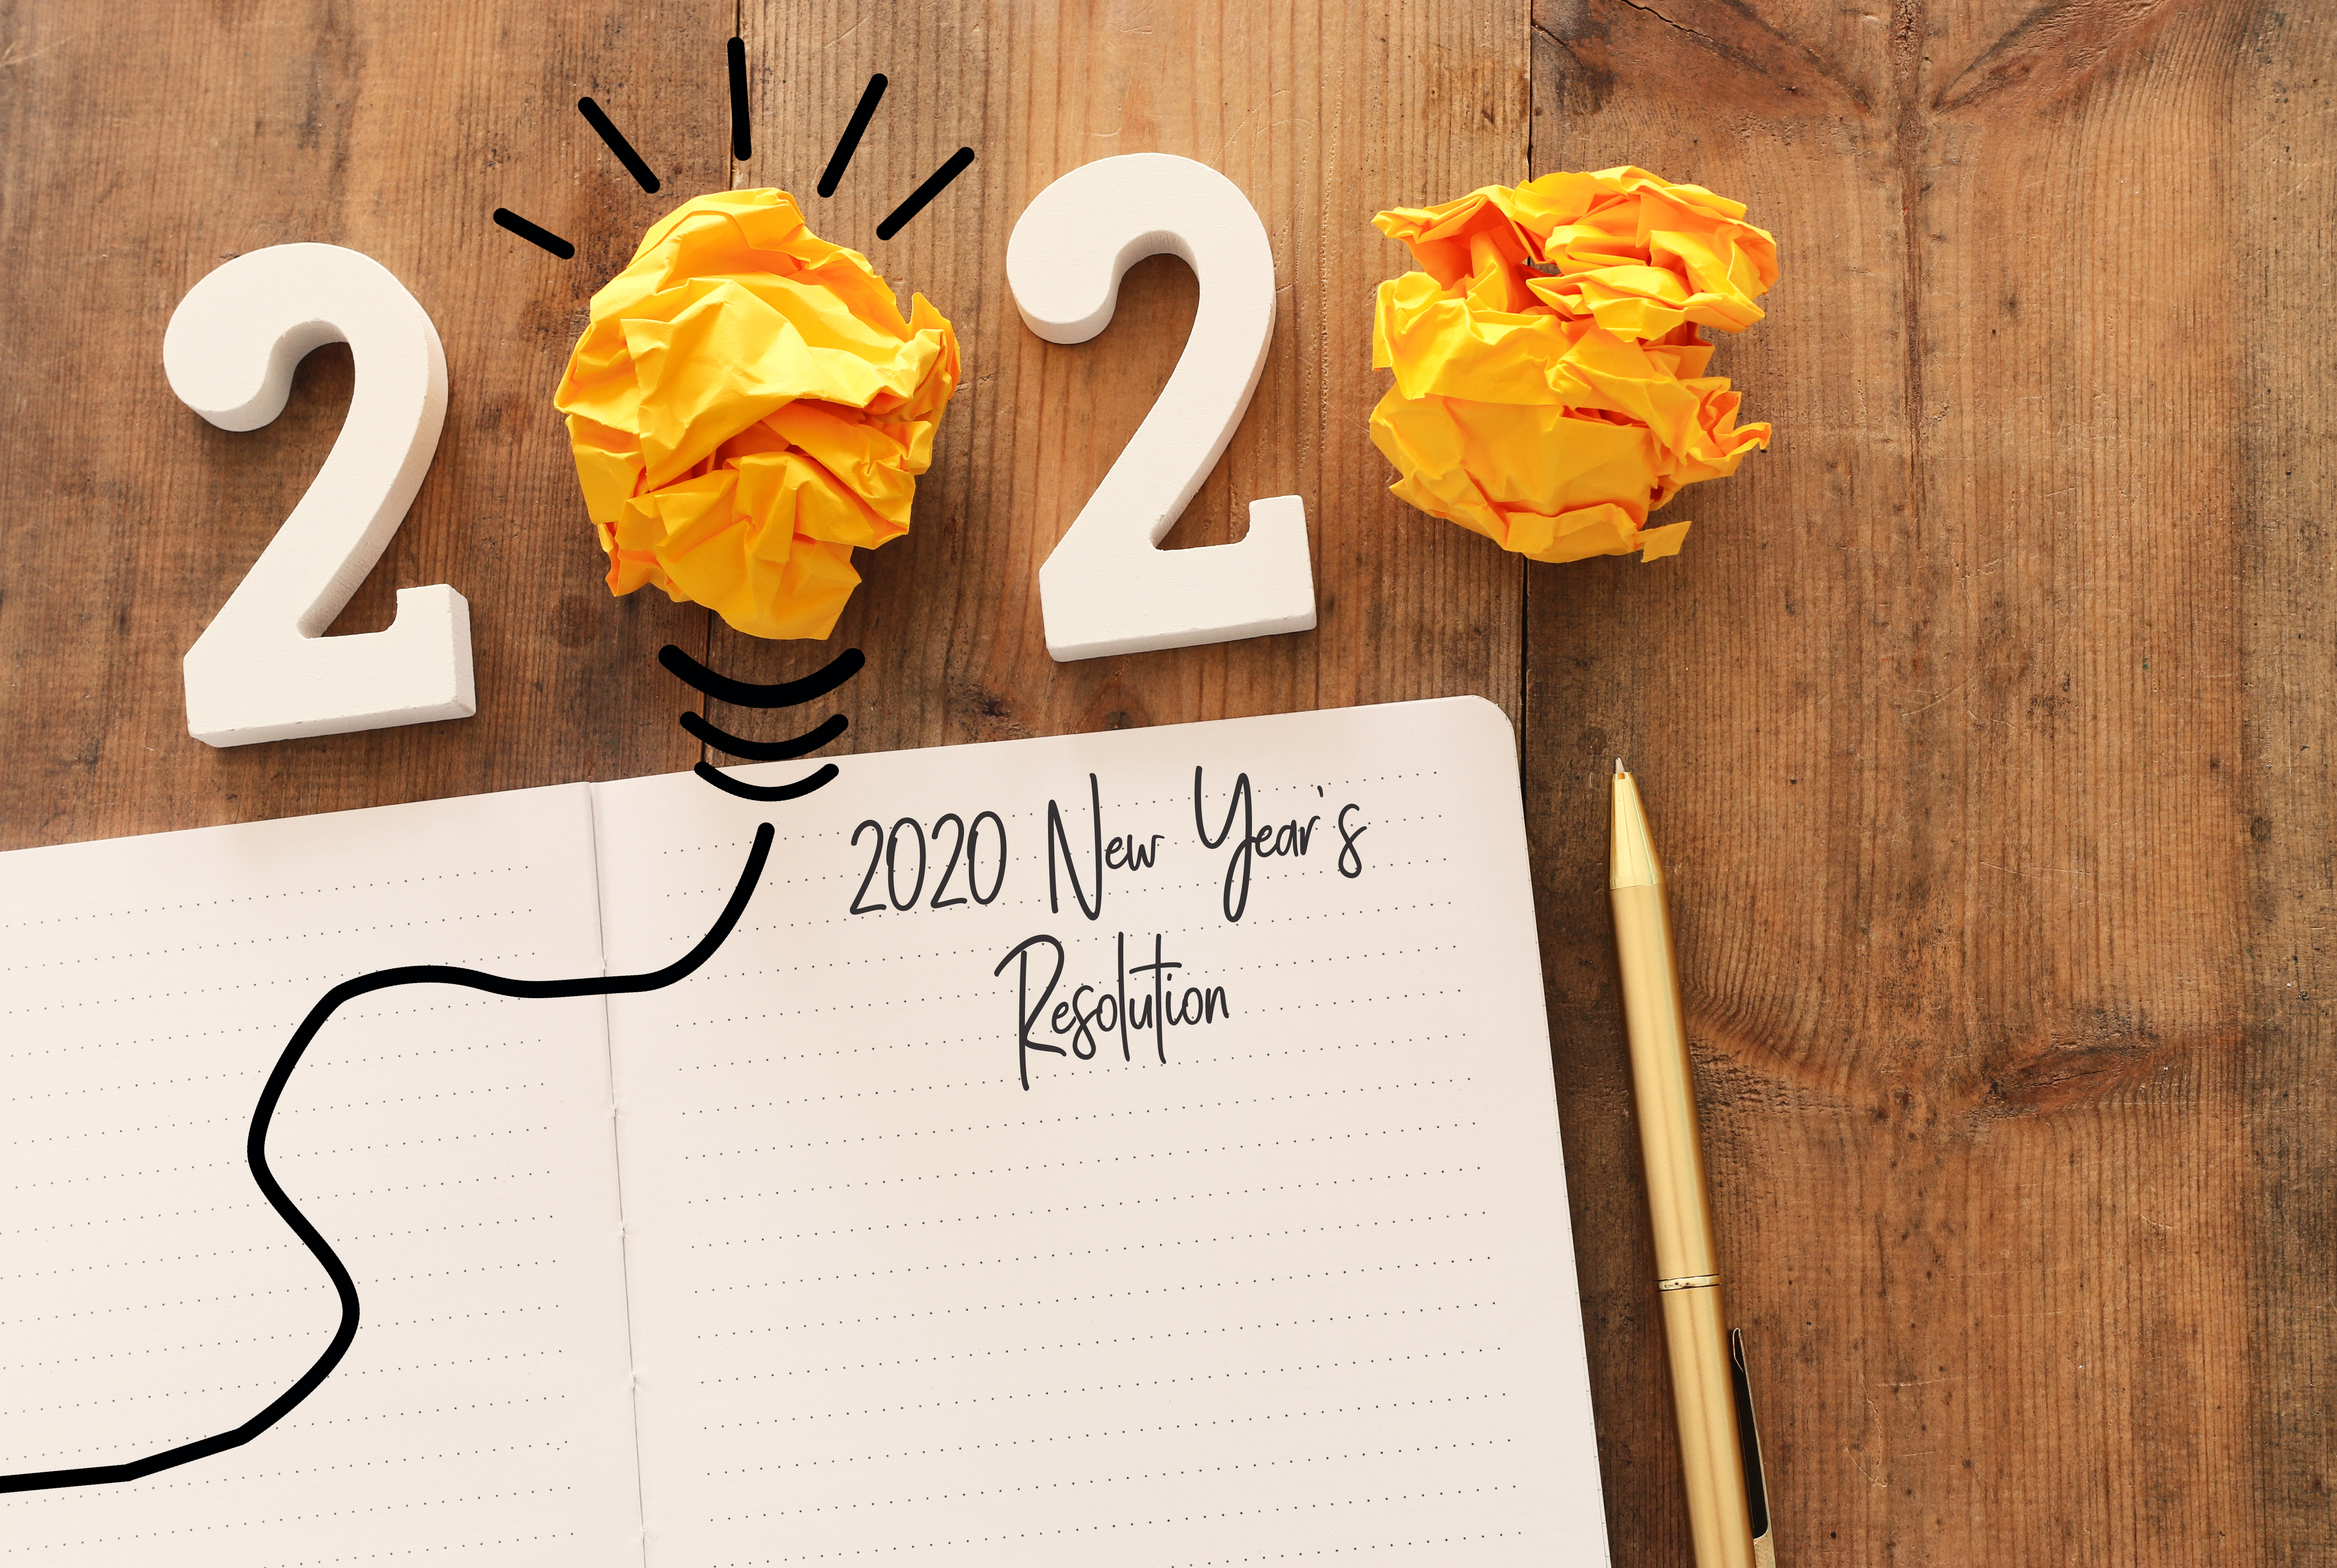 Can New Year’s resolutions change your business in 2020?